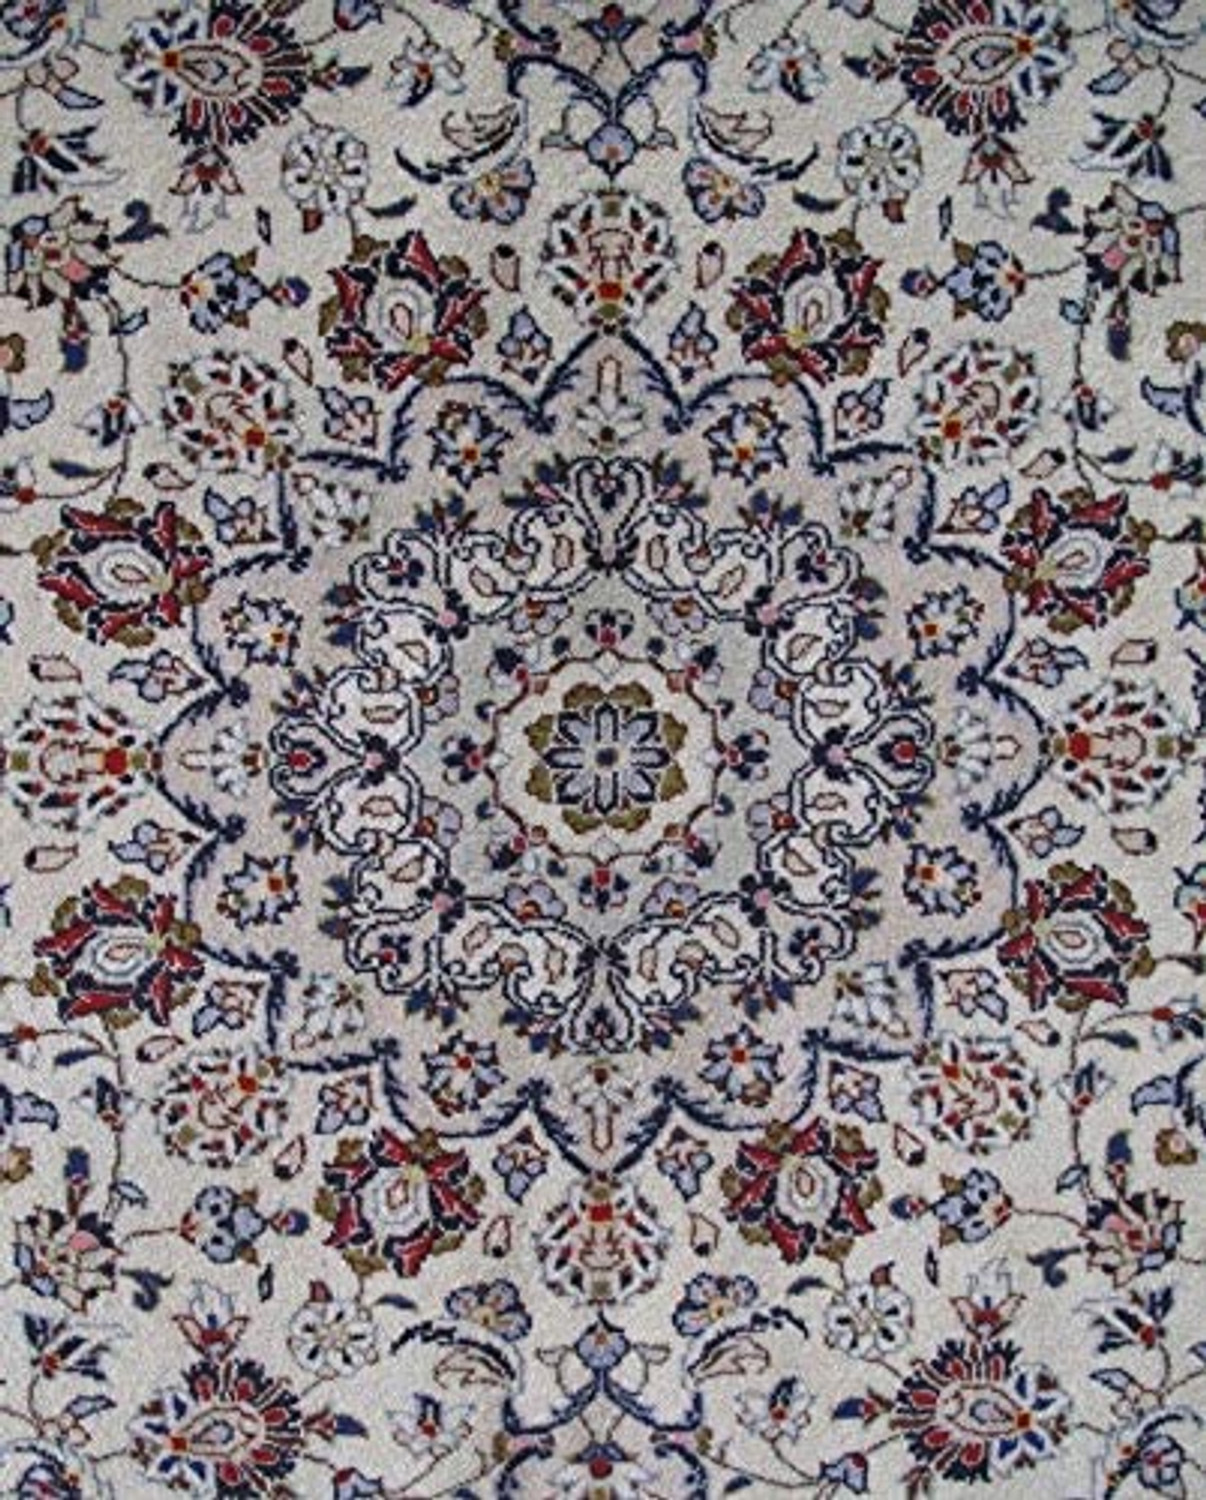 8 x 12 Persian Kashan Rug signed by weaver